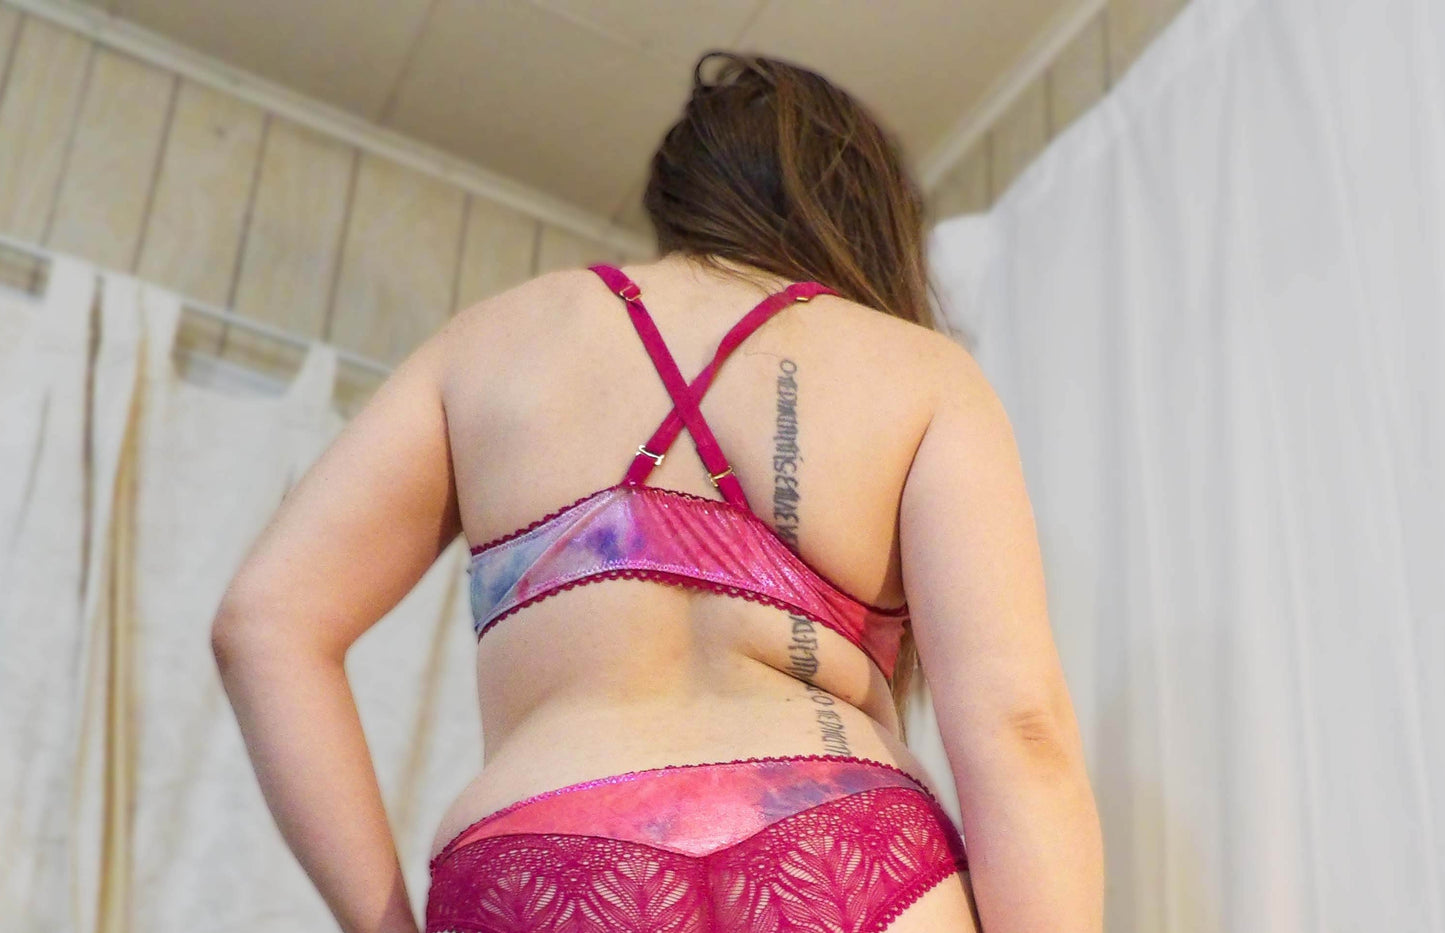 Iridescent Dreams and Magenta Lace 1/2 Cup Bralette, Unlined